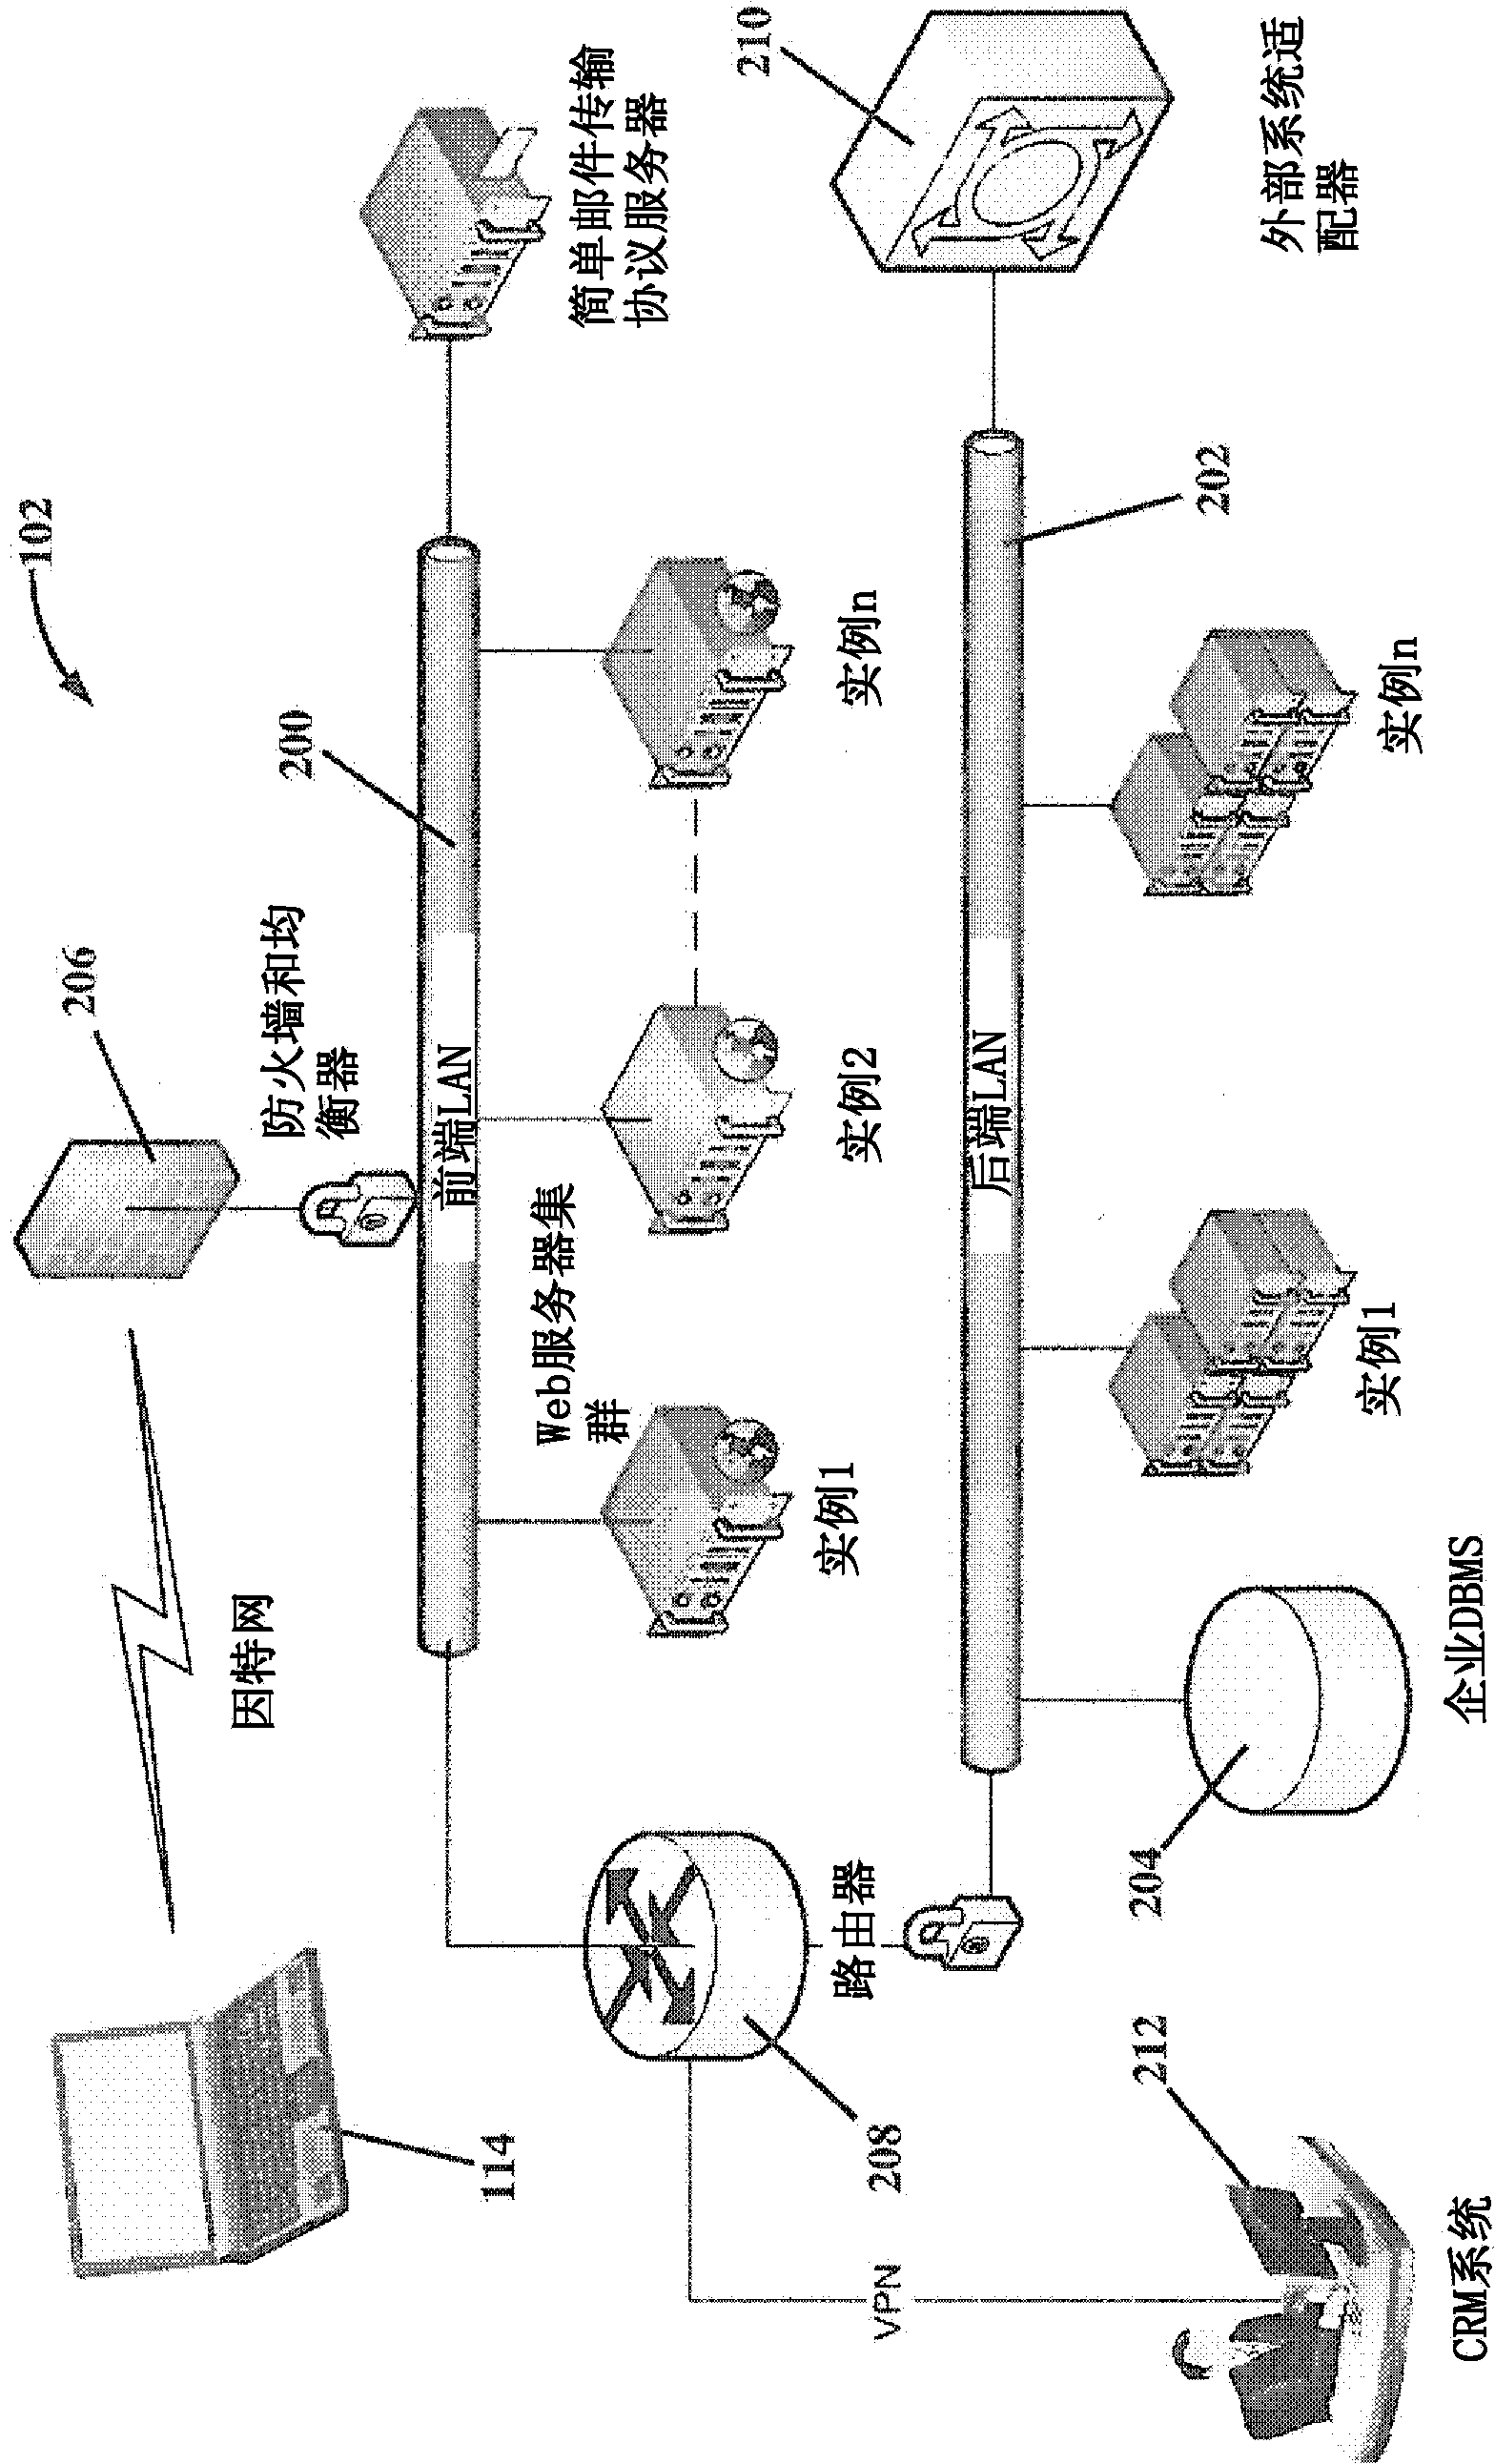 System and method for providing and transferring fungible electronic money